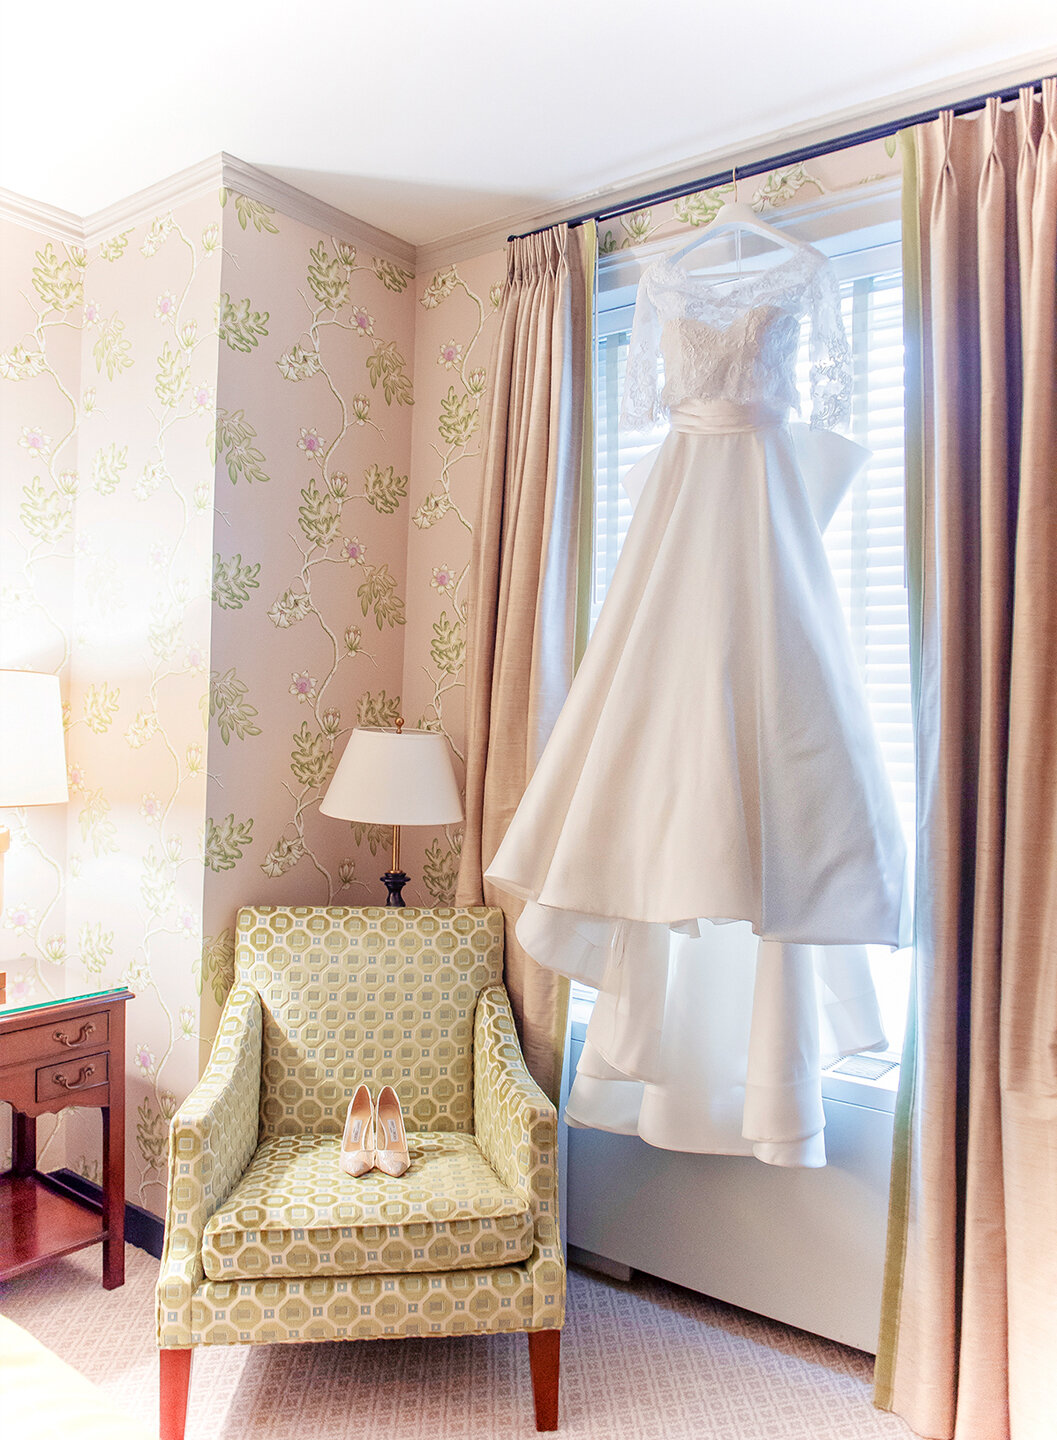 A detail of the bride's room